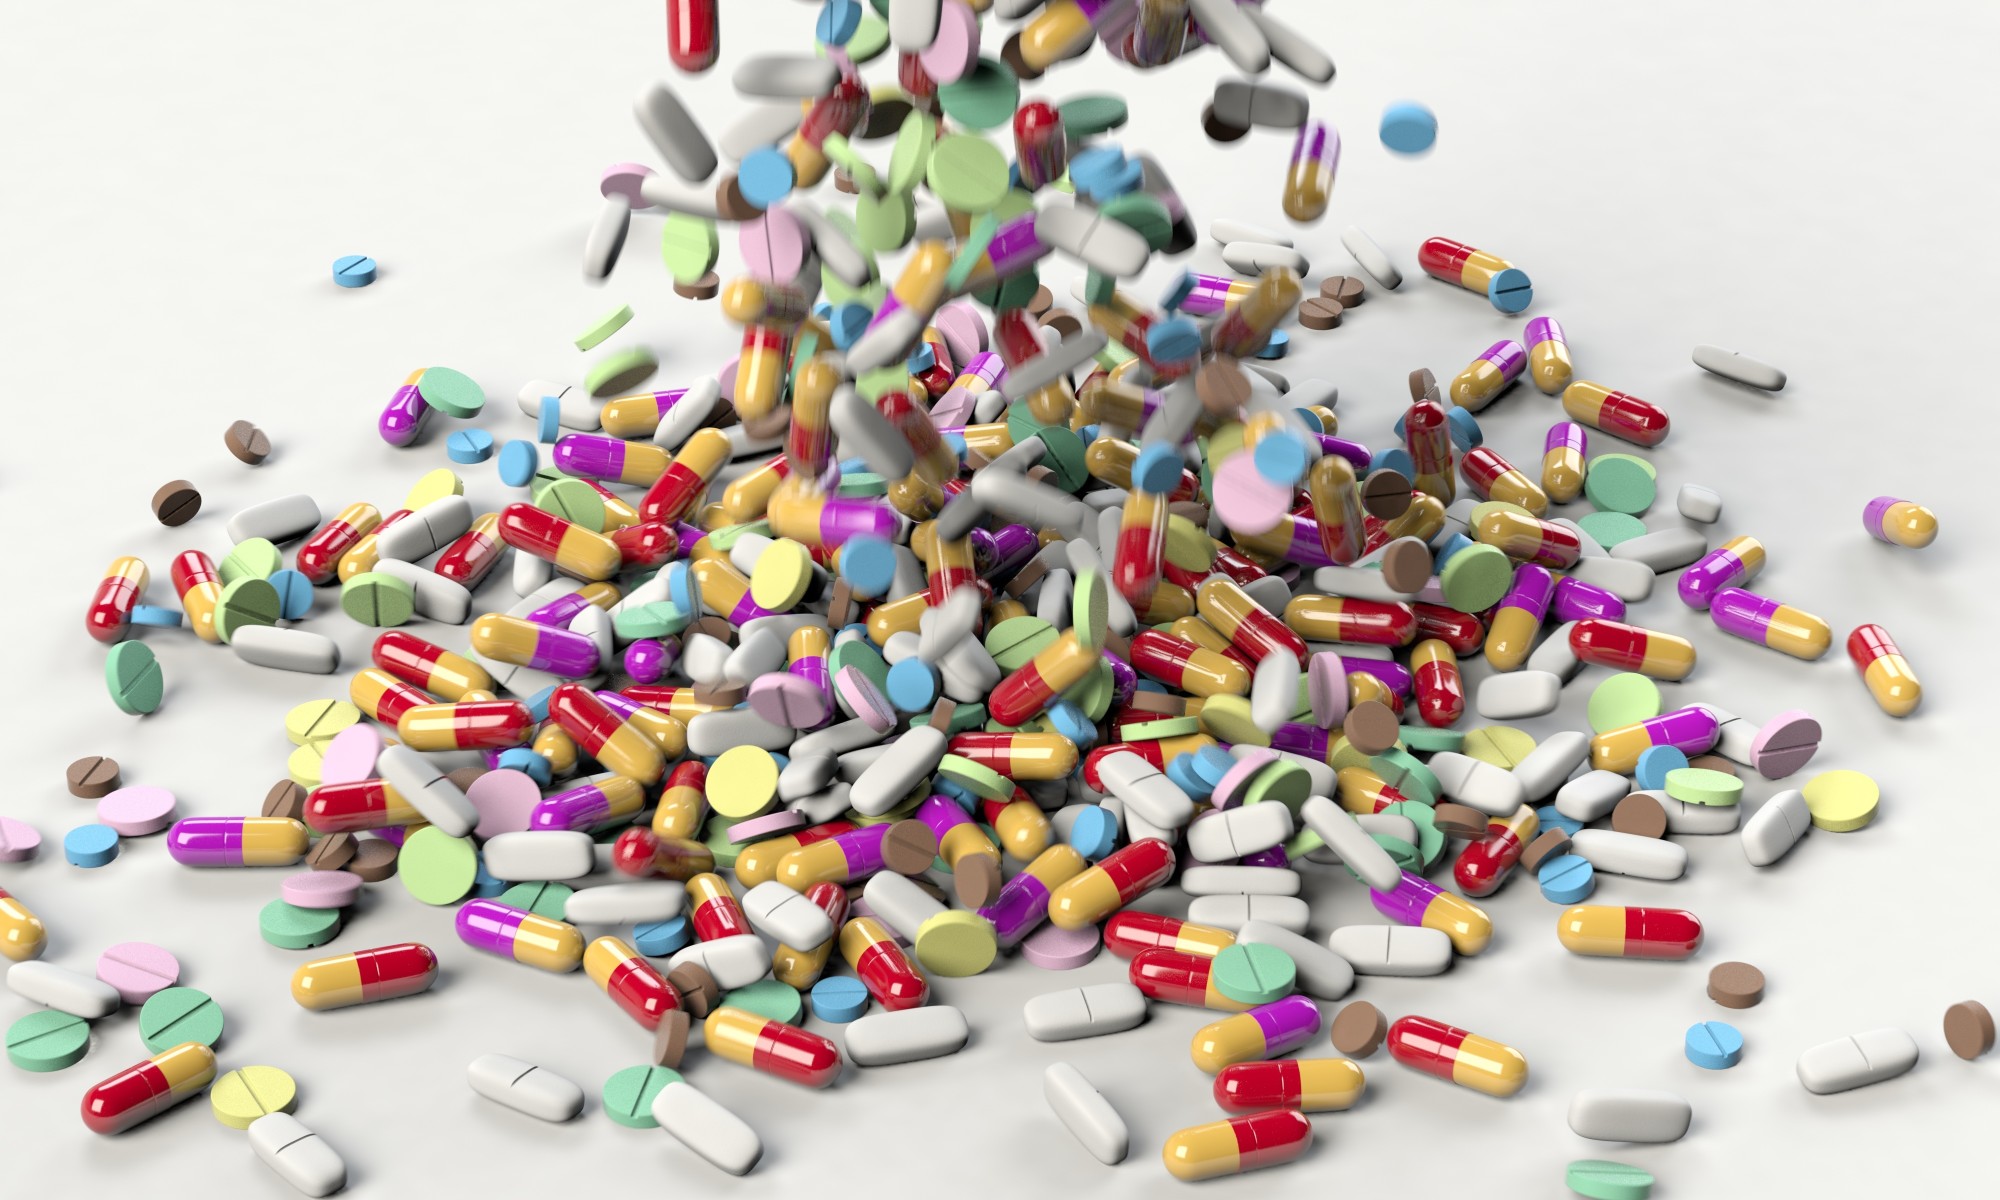 Pharmacology vs. Pharmacy: What Are the Differences?